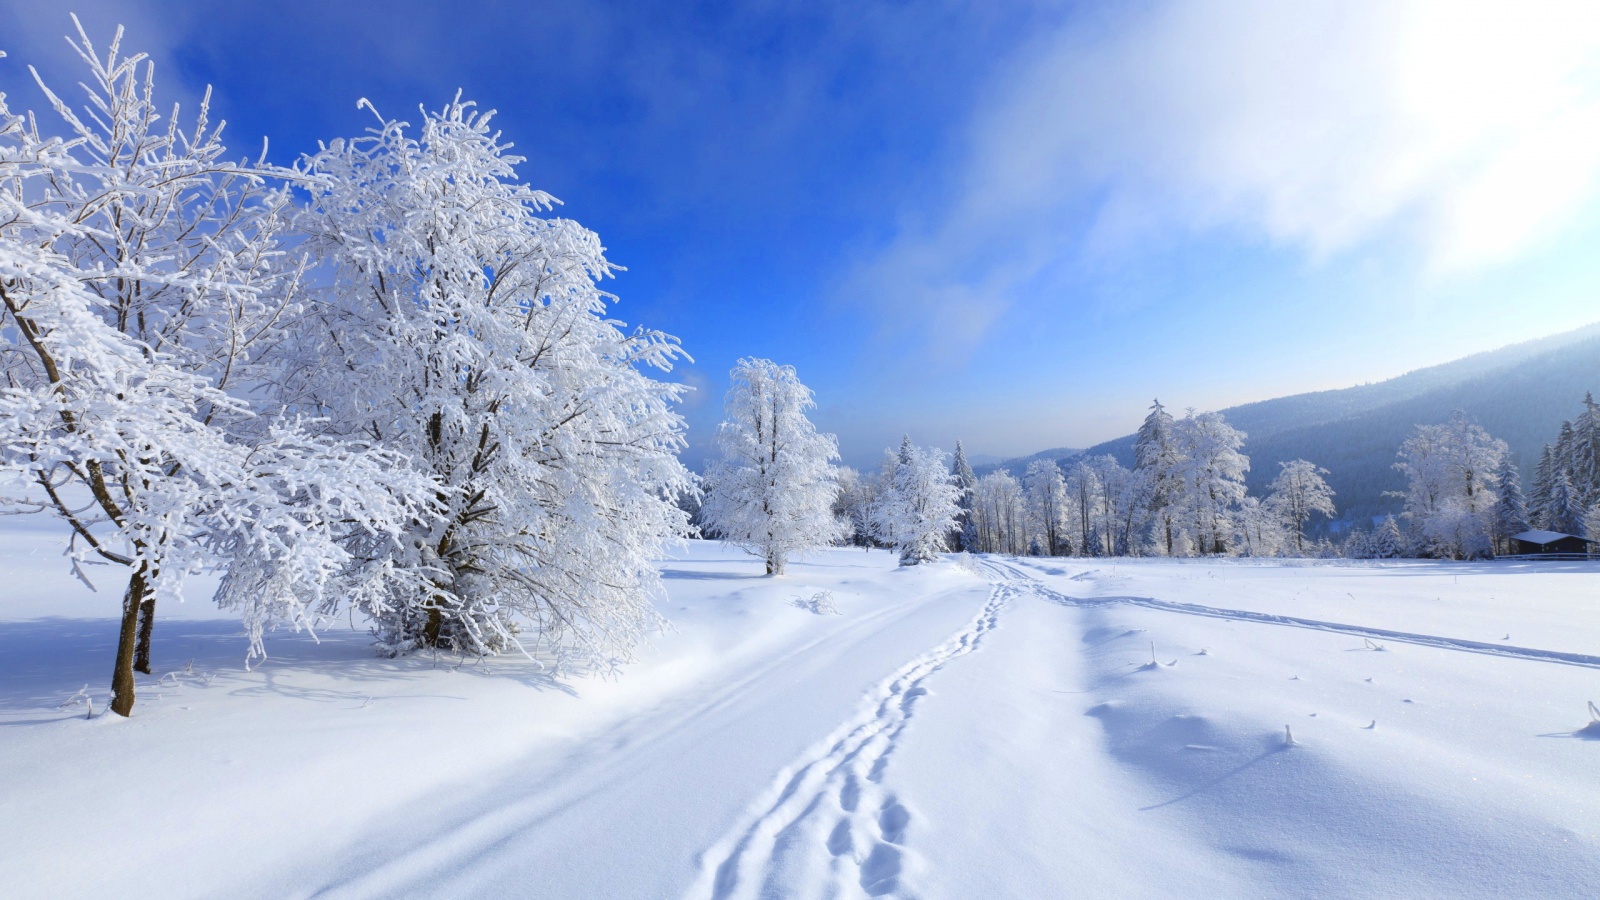 hd wallpapers for laptop,snow,winter,sky,nature,tree